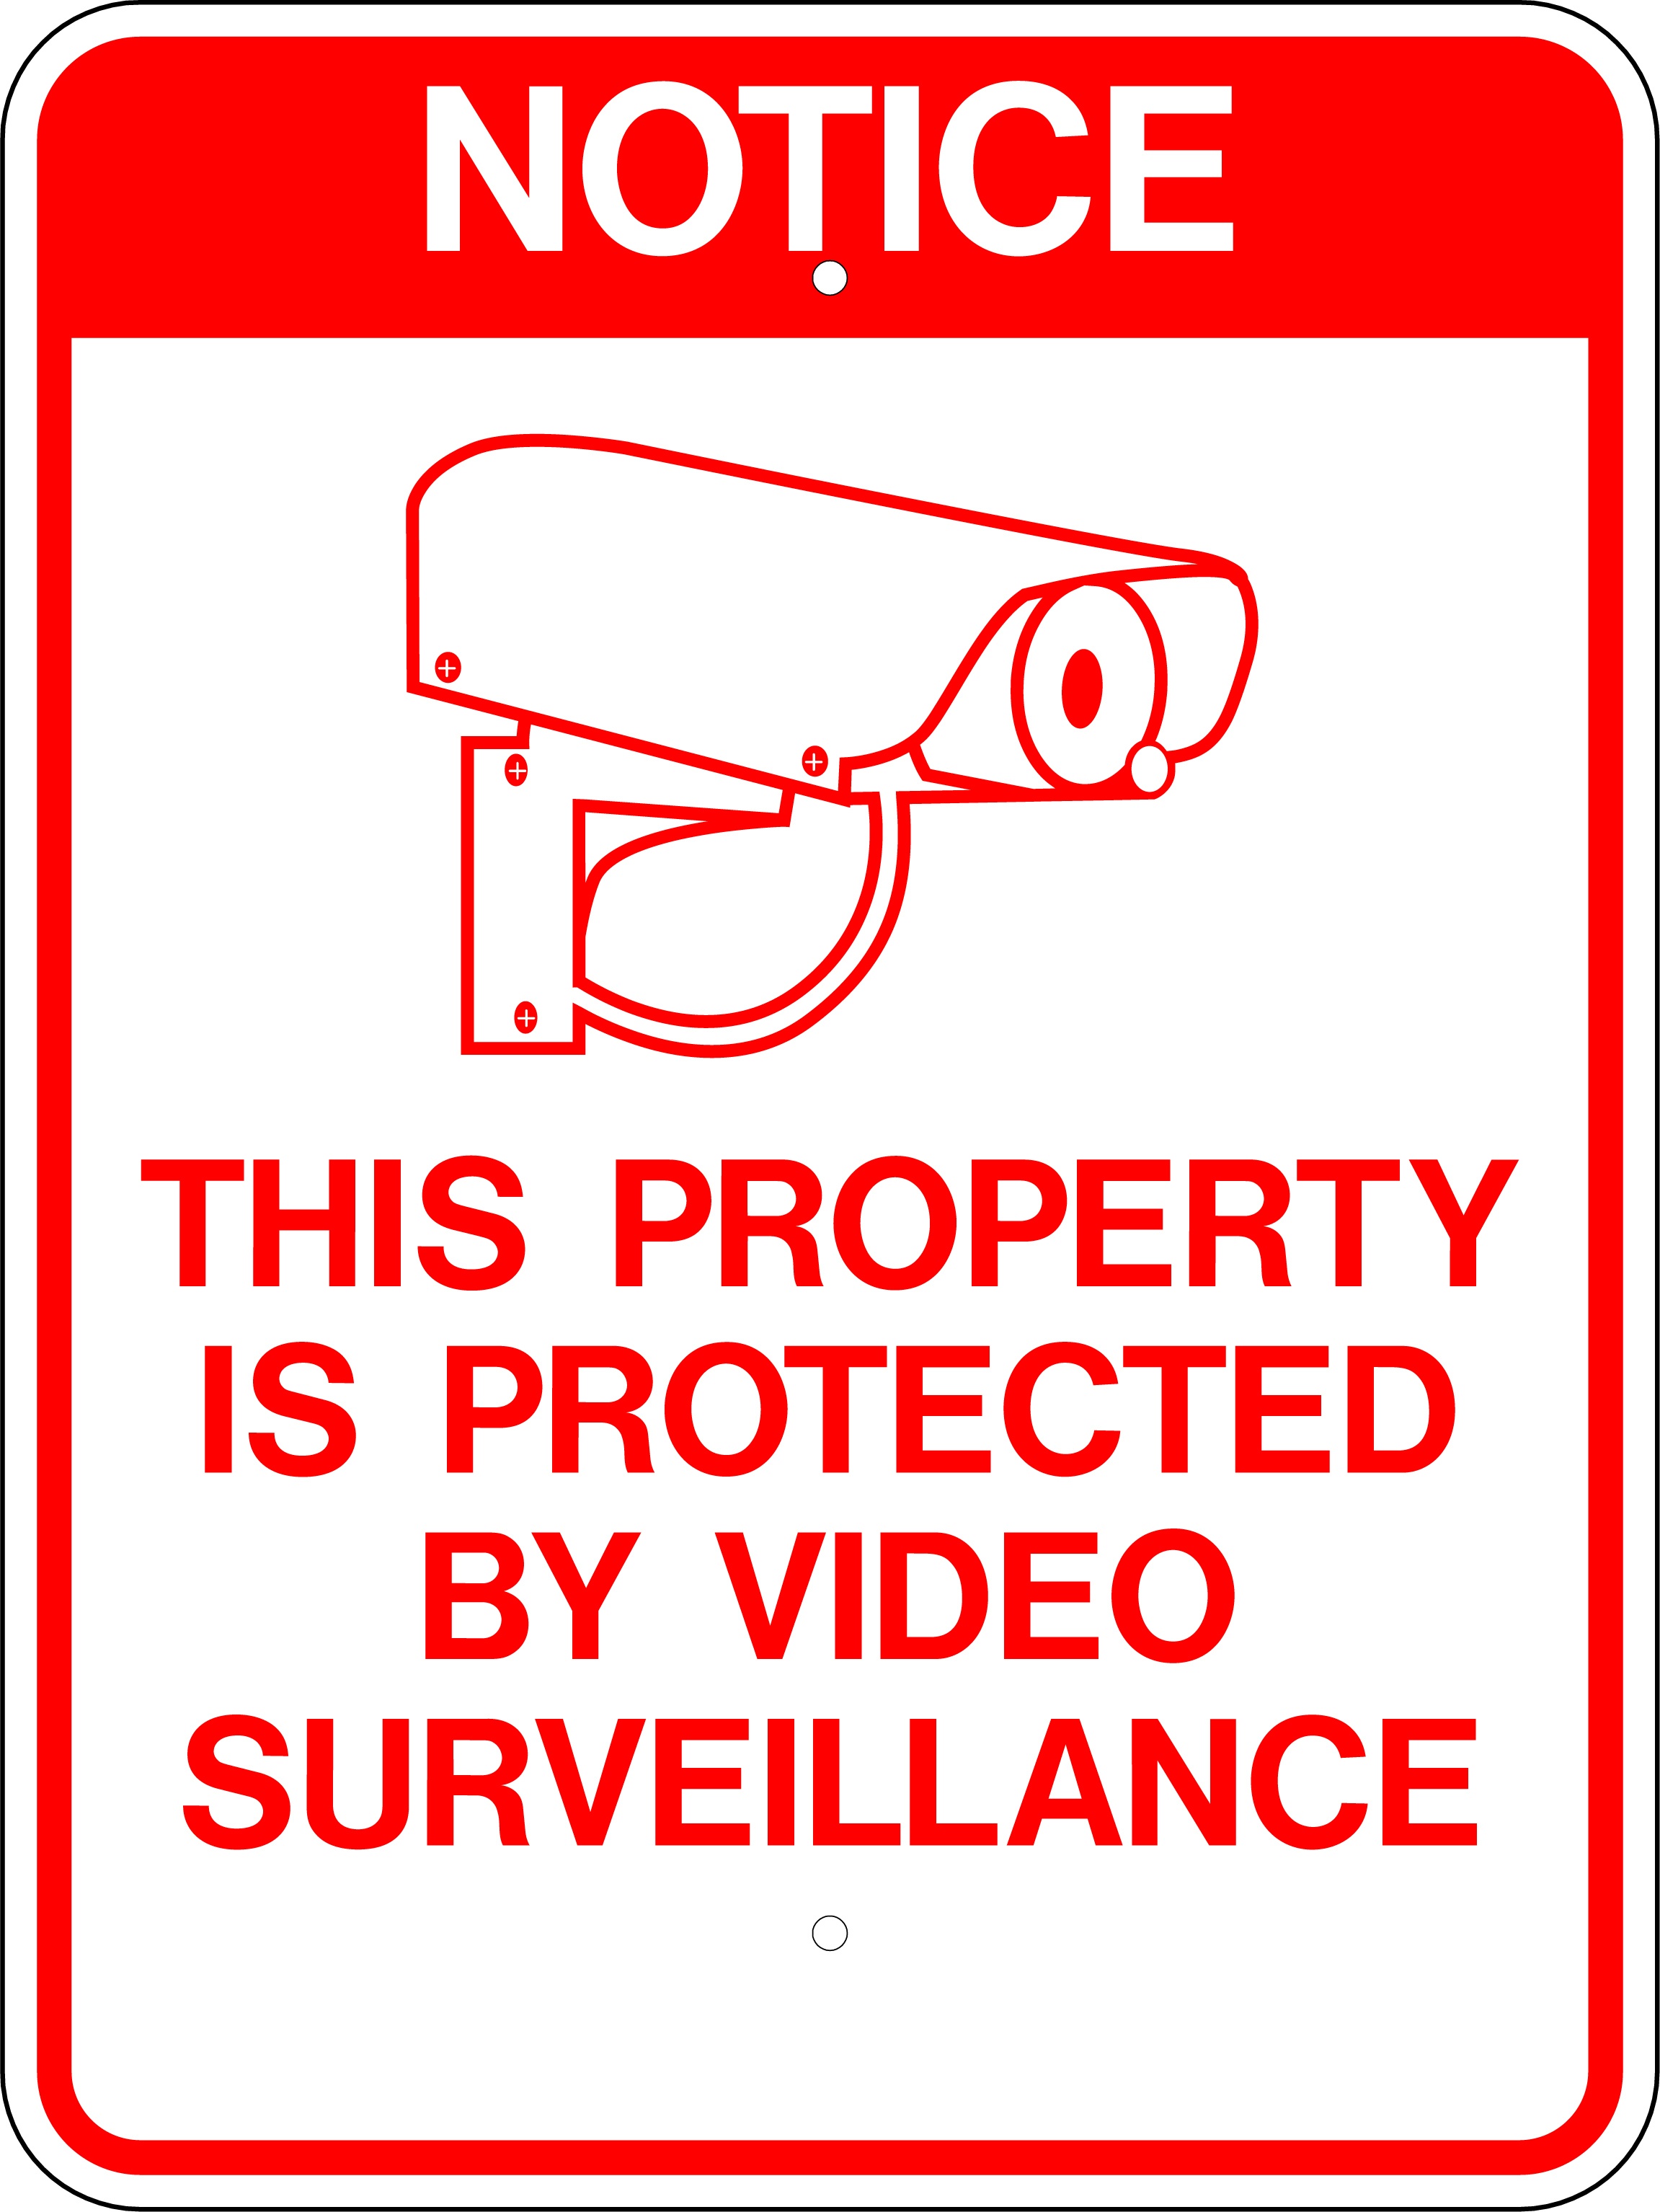 Lynch Sign 14 In. X 10 In. 24 Hour Video Surveillance Sign Printed - Printable Video Surveillance Signs Free